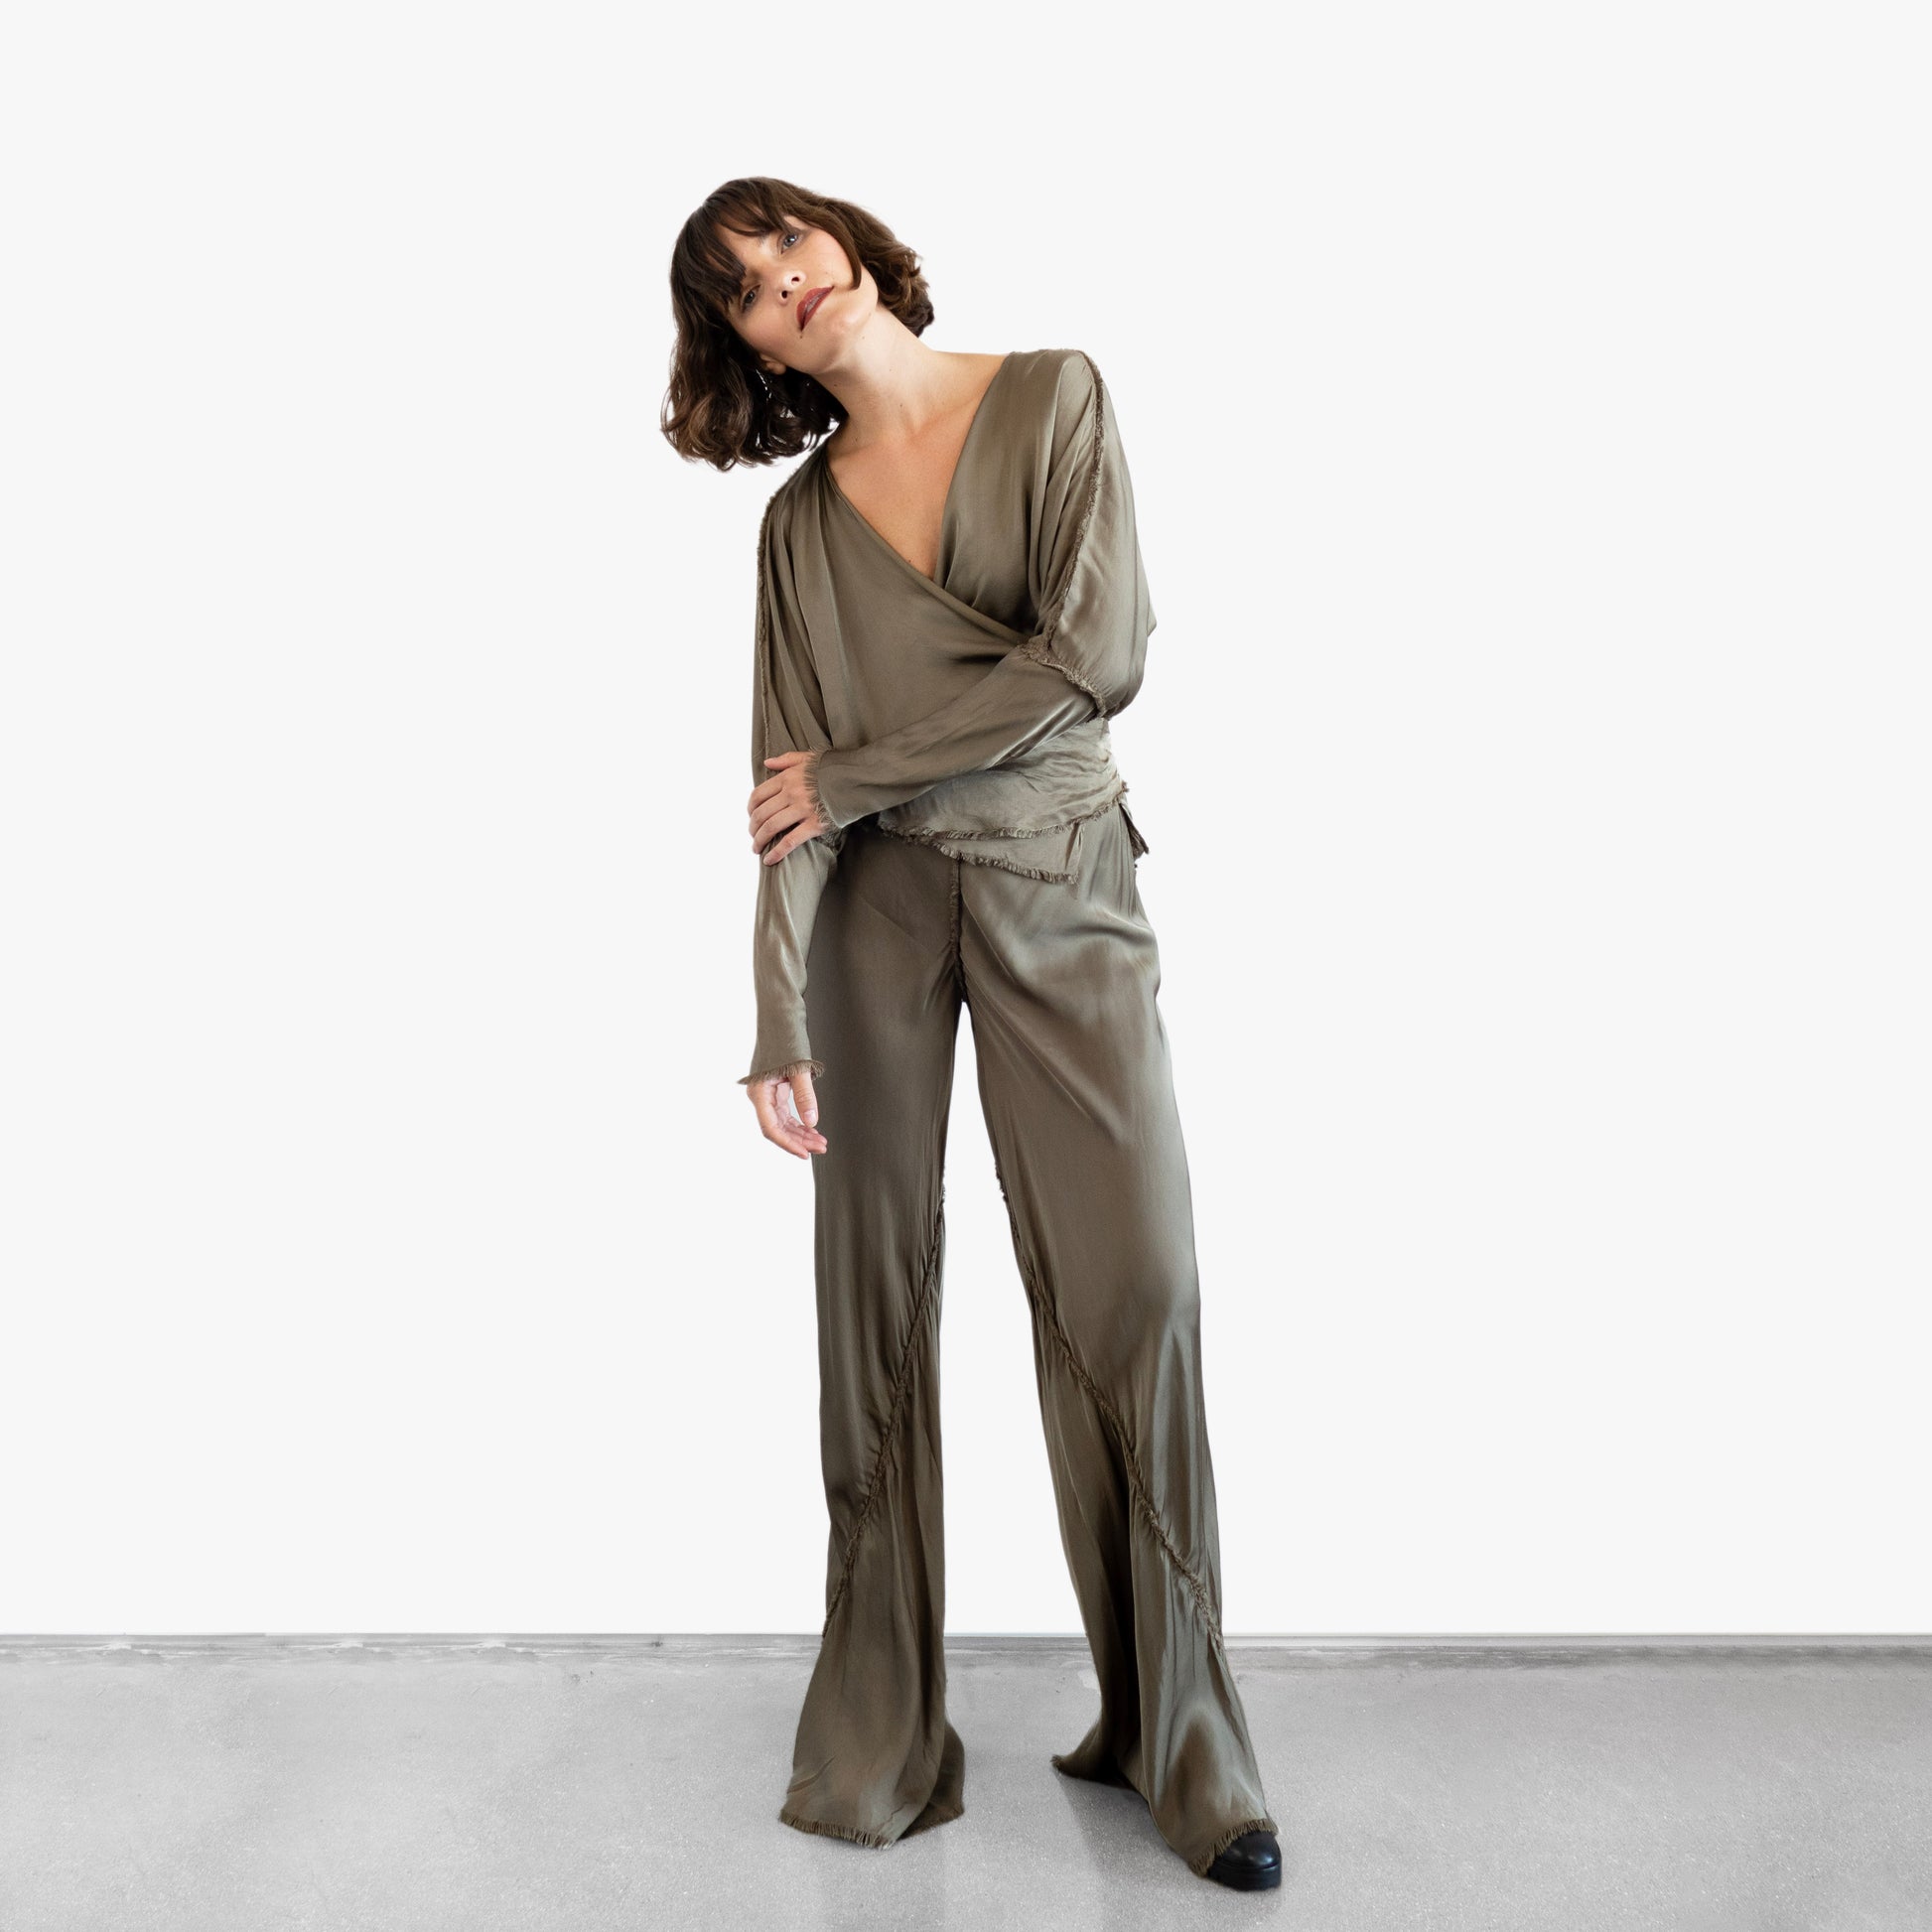 Model wearing a green silk wrap top and silk pants